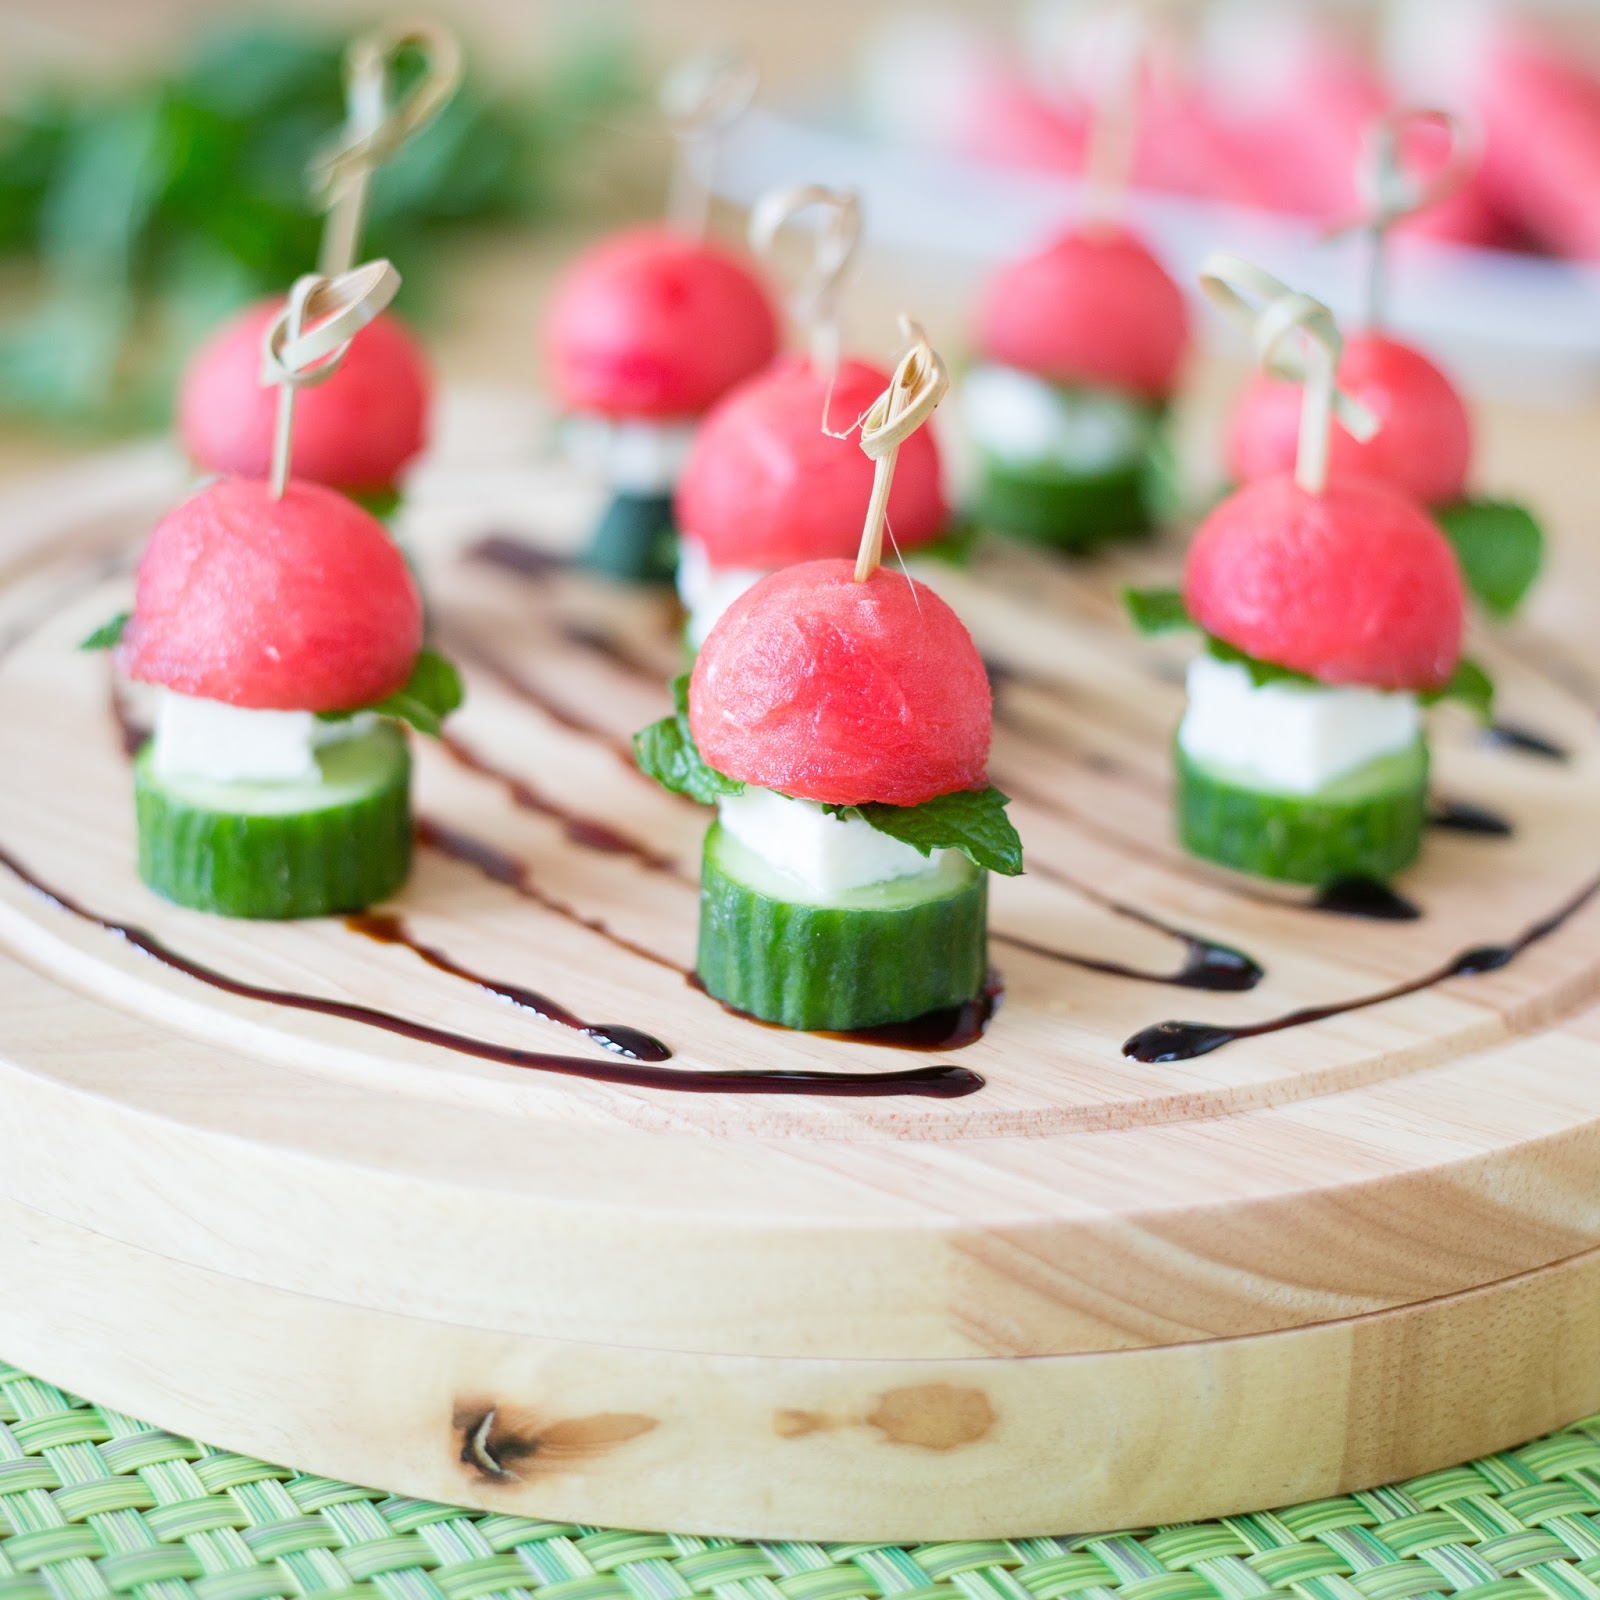 W is for: Watermelon Skewers with Feta, Mint & Cucumber - e is for eat